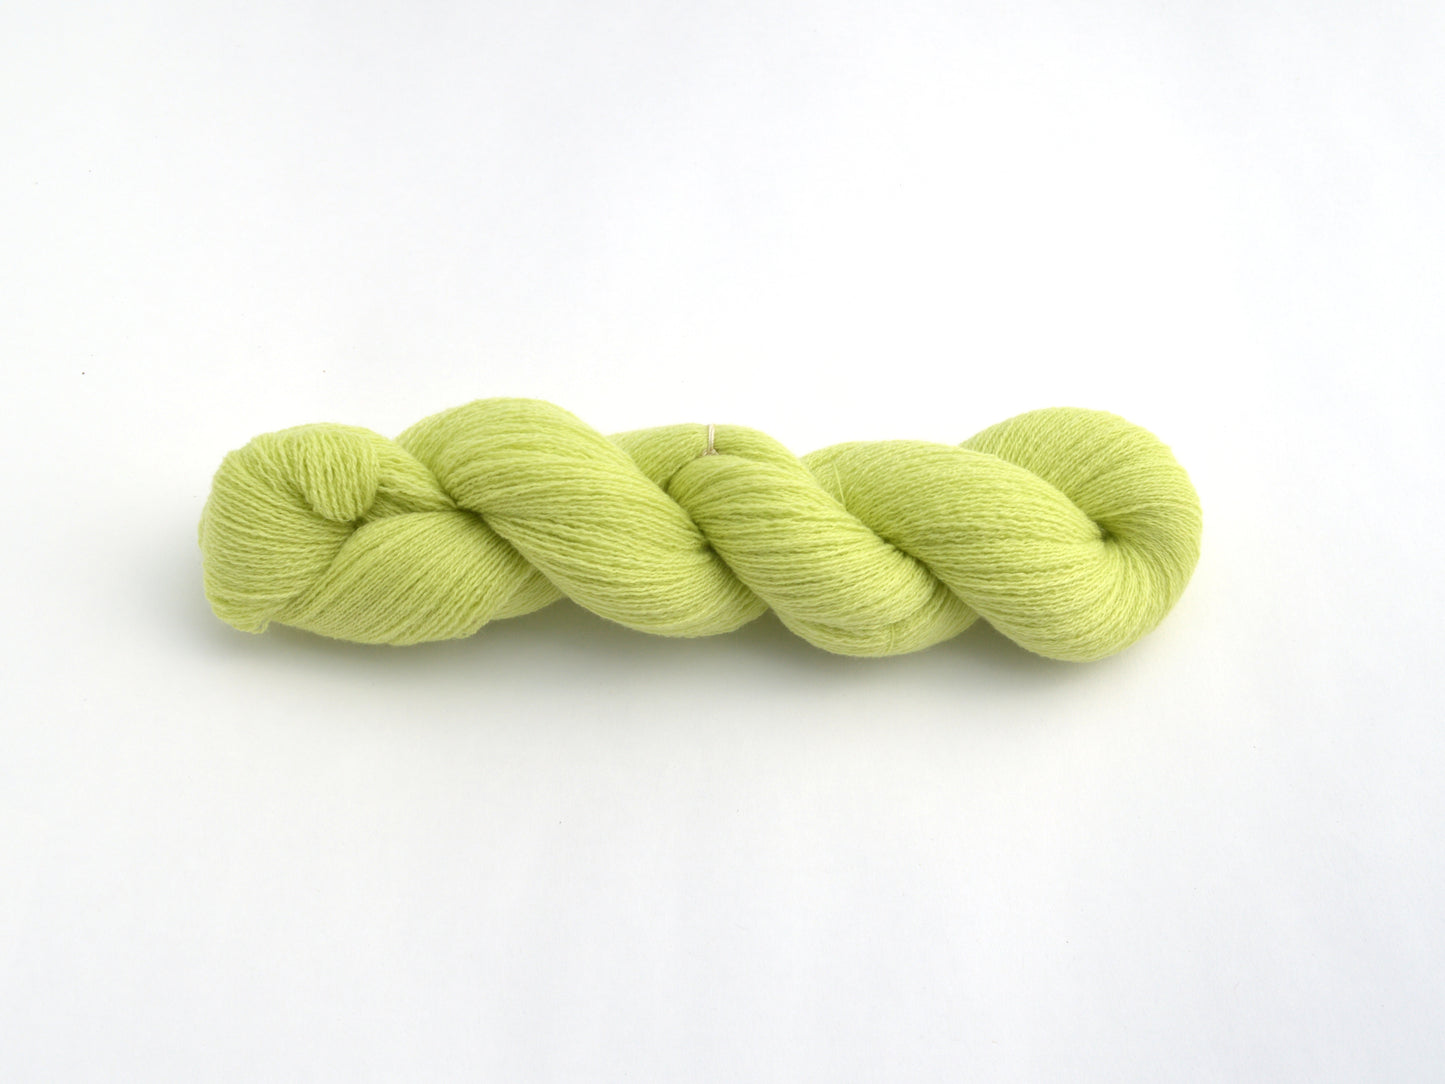 Lace Weight Recycled Cashmere Yarn in Chartreuse